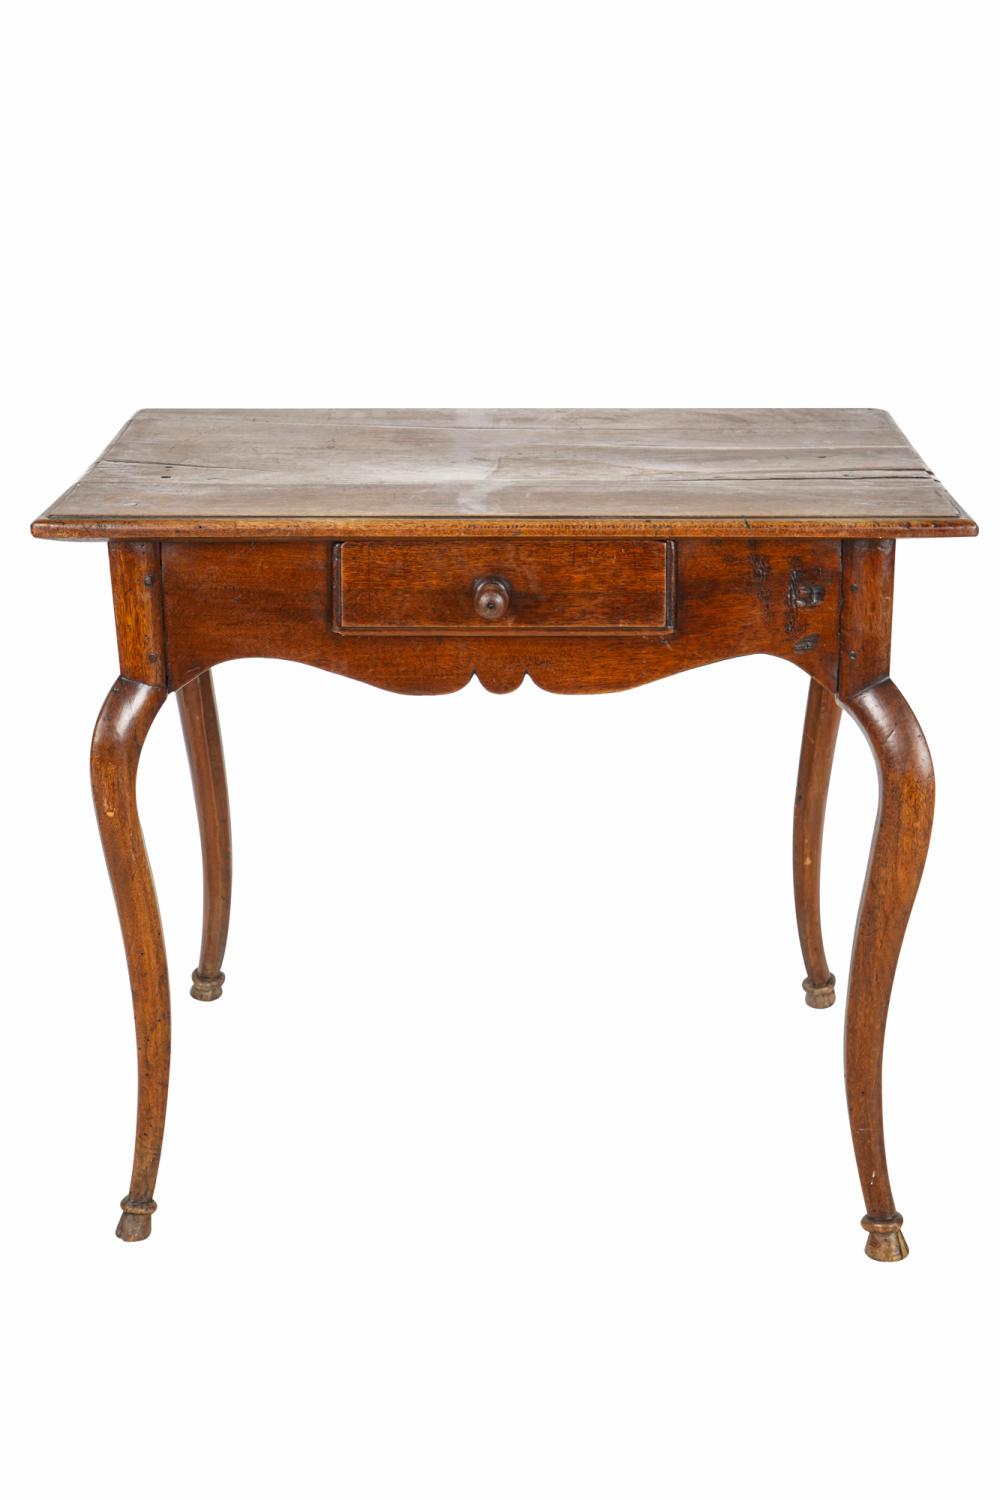 FRENCH PROVINCIAL WALNUT SIDE TABLE19th